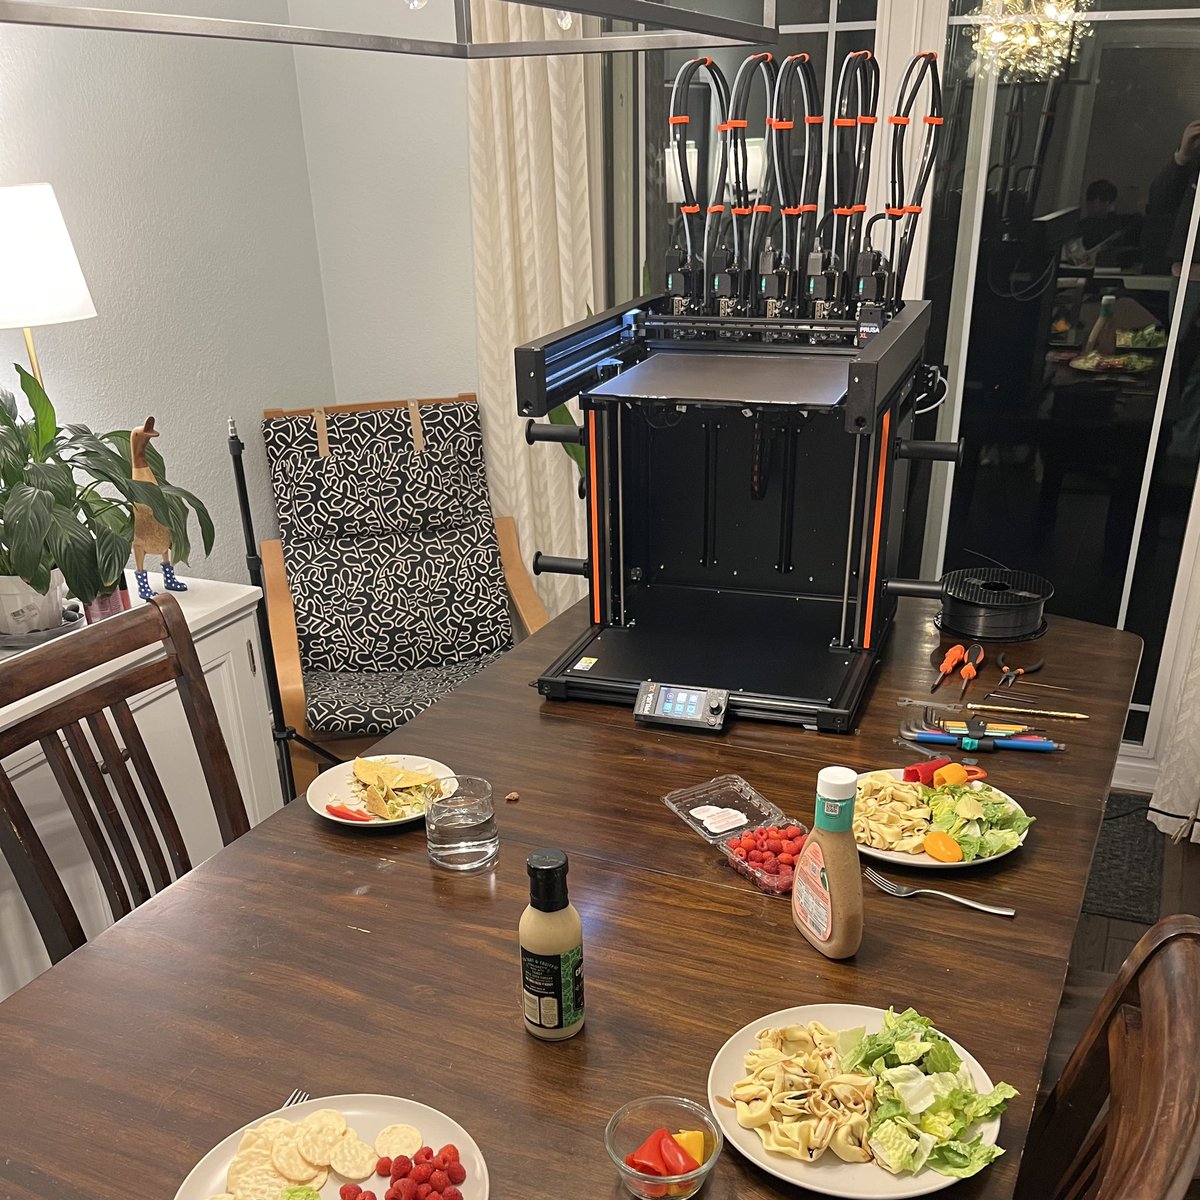 I guess it’s our dinner guest 😆 
#prusa #prusaxl #3dprinting #3dprinter